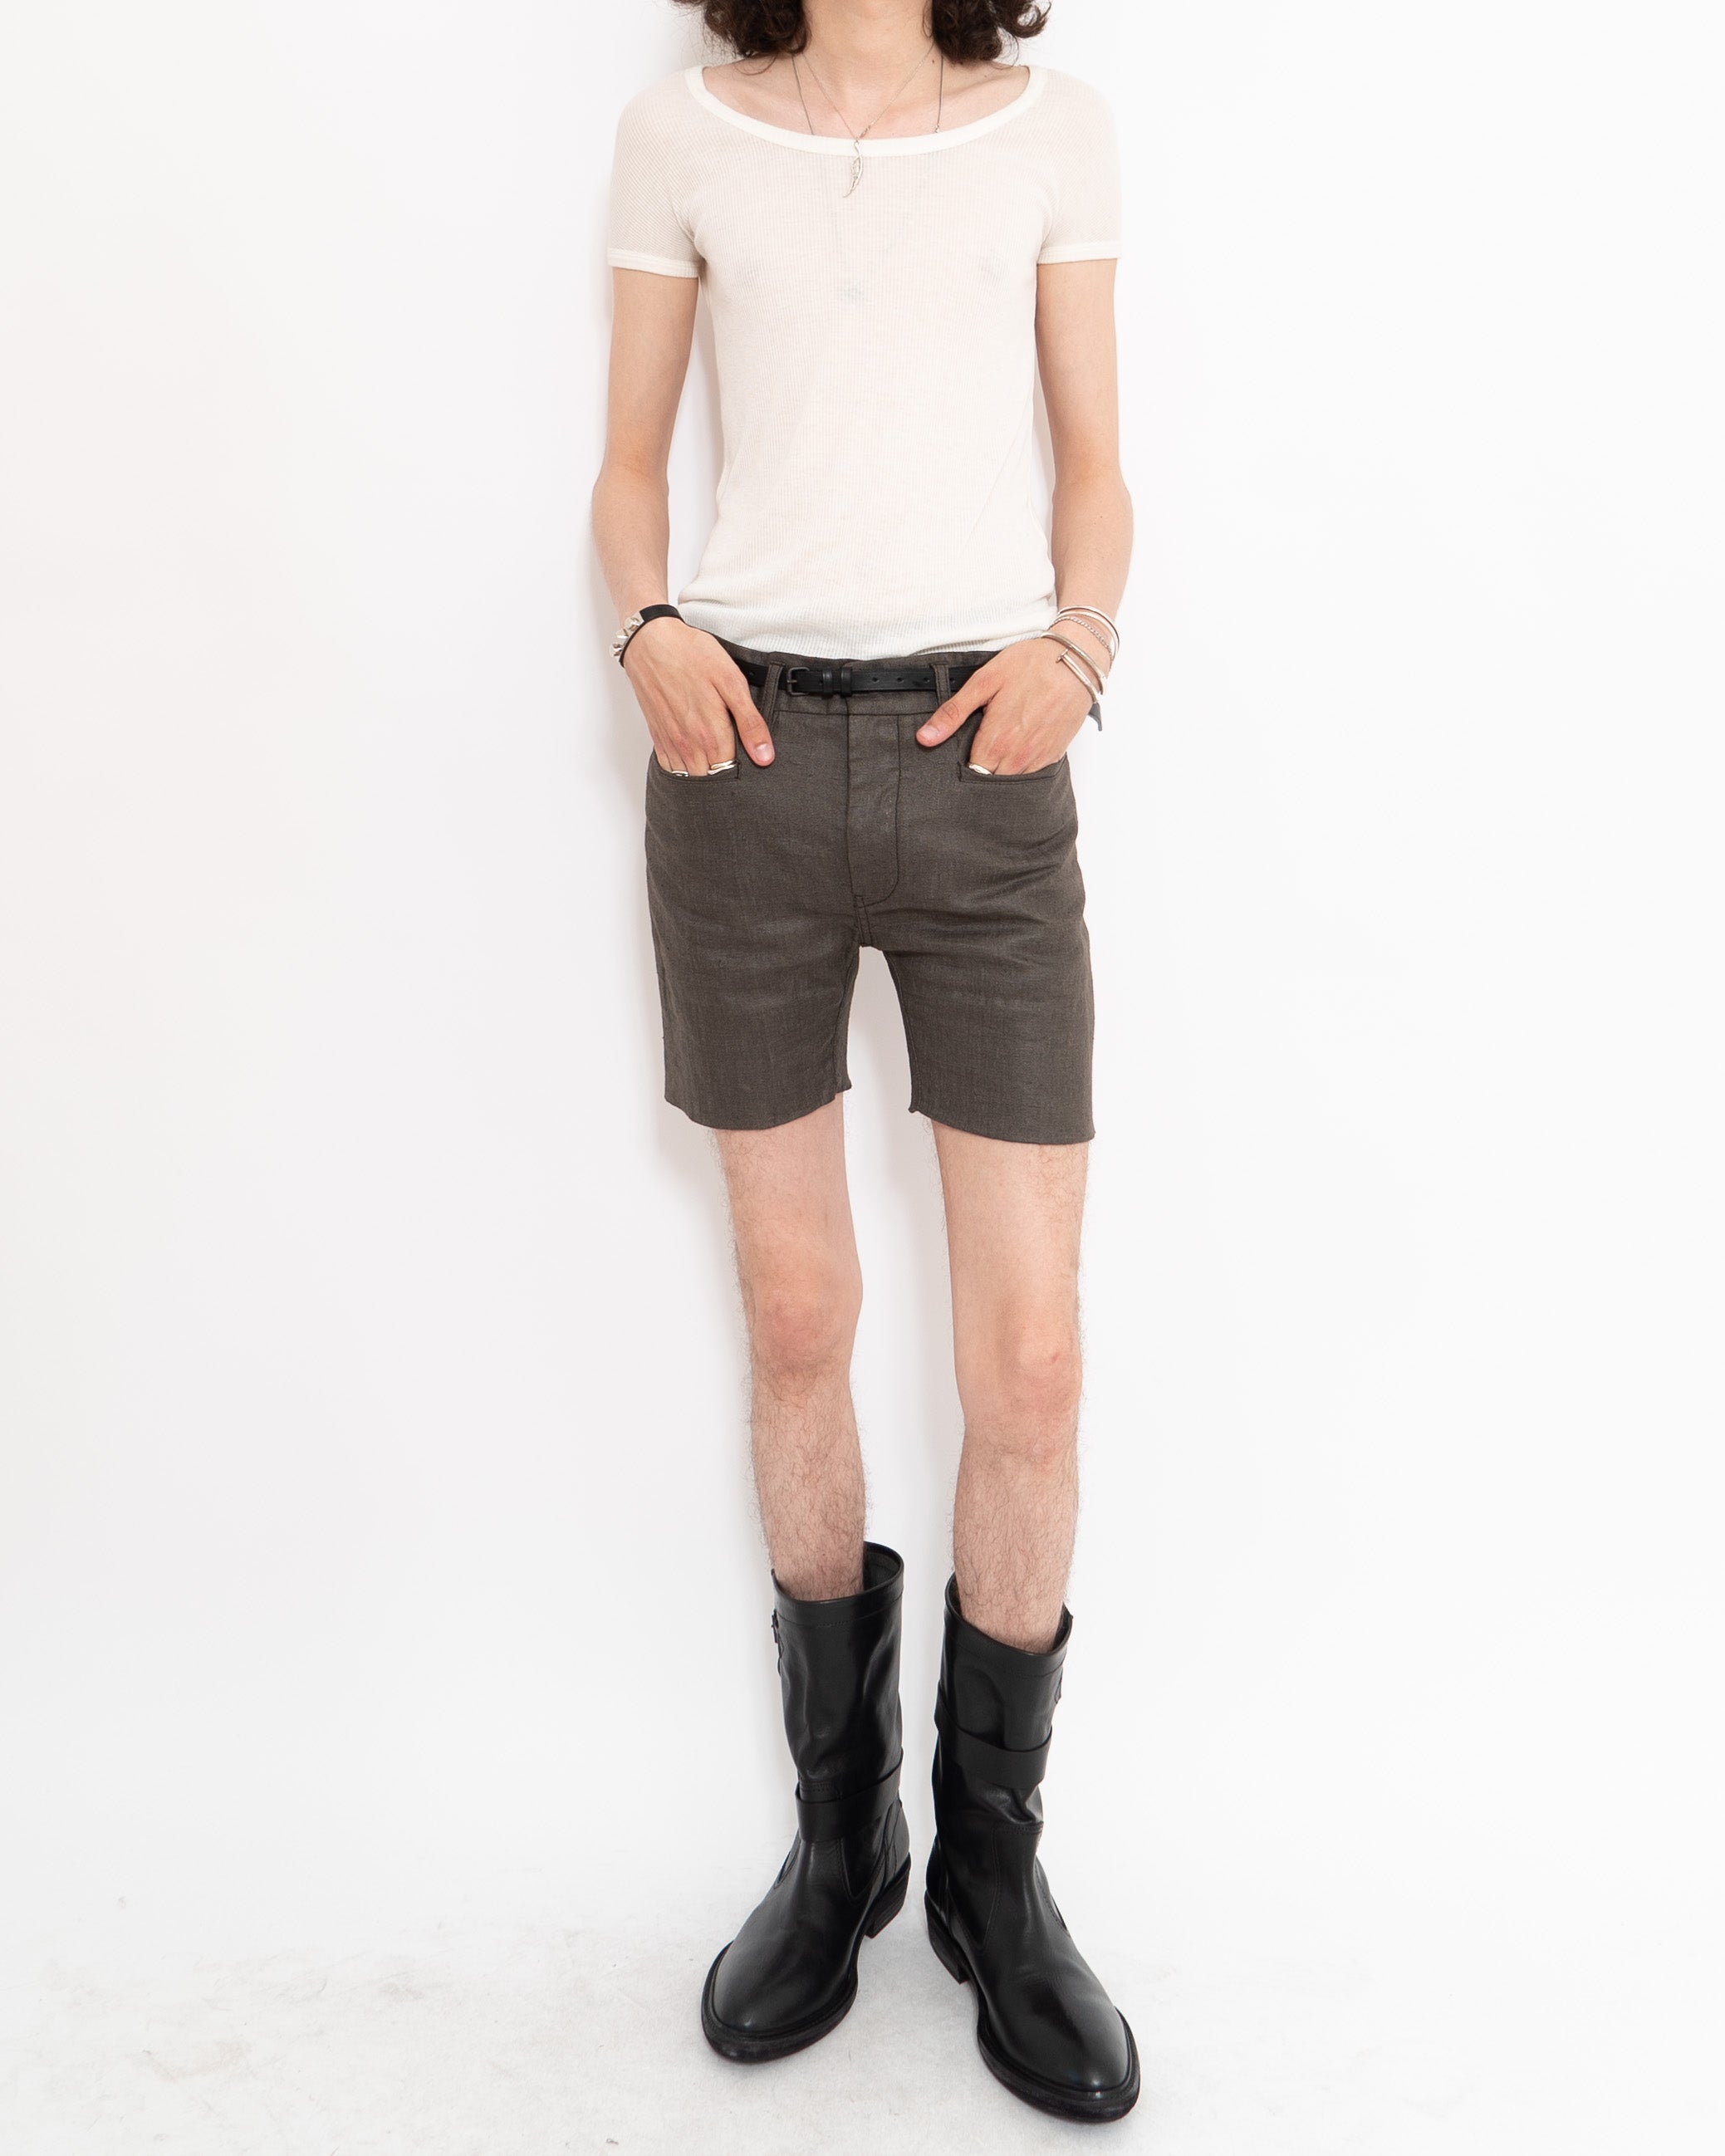 SS16 Brown Cotton Shorts Sample